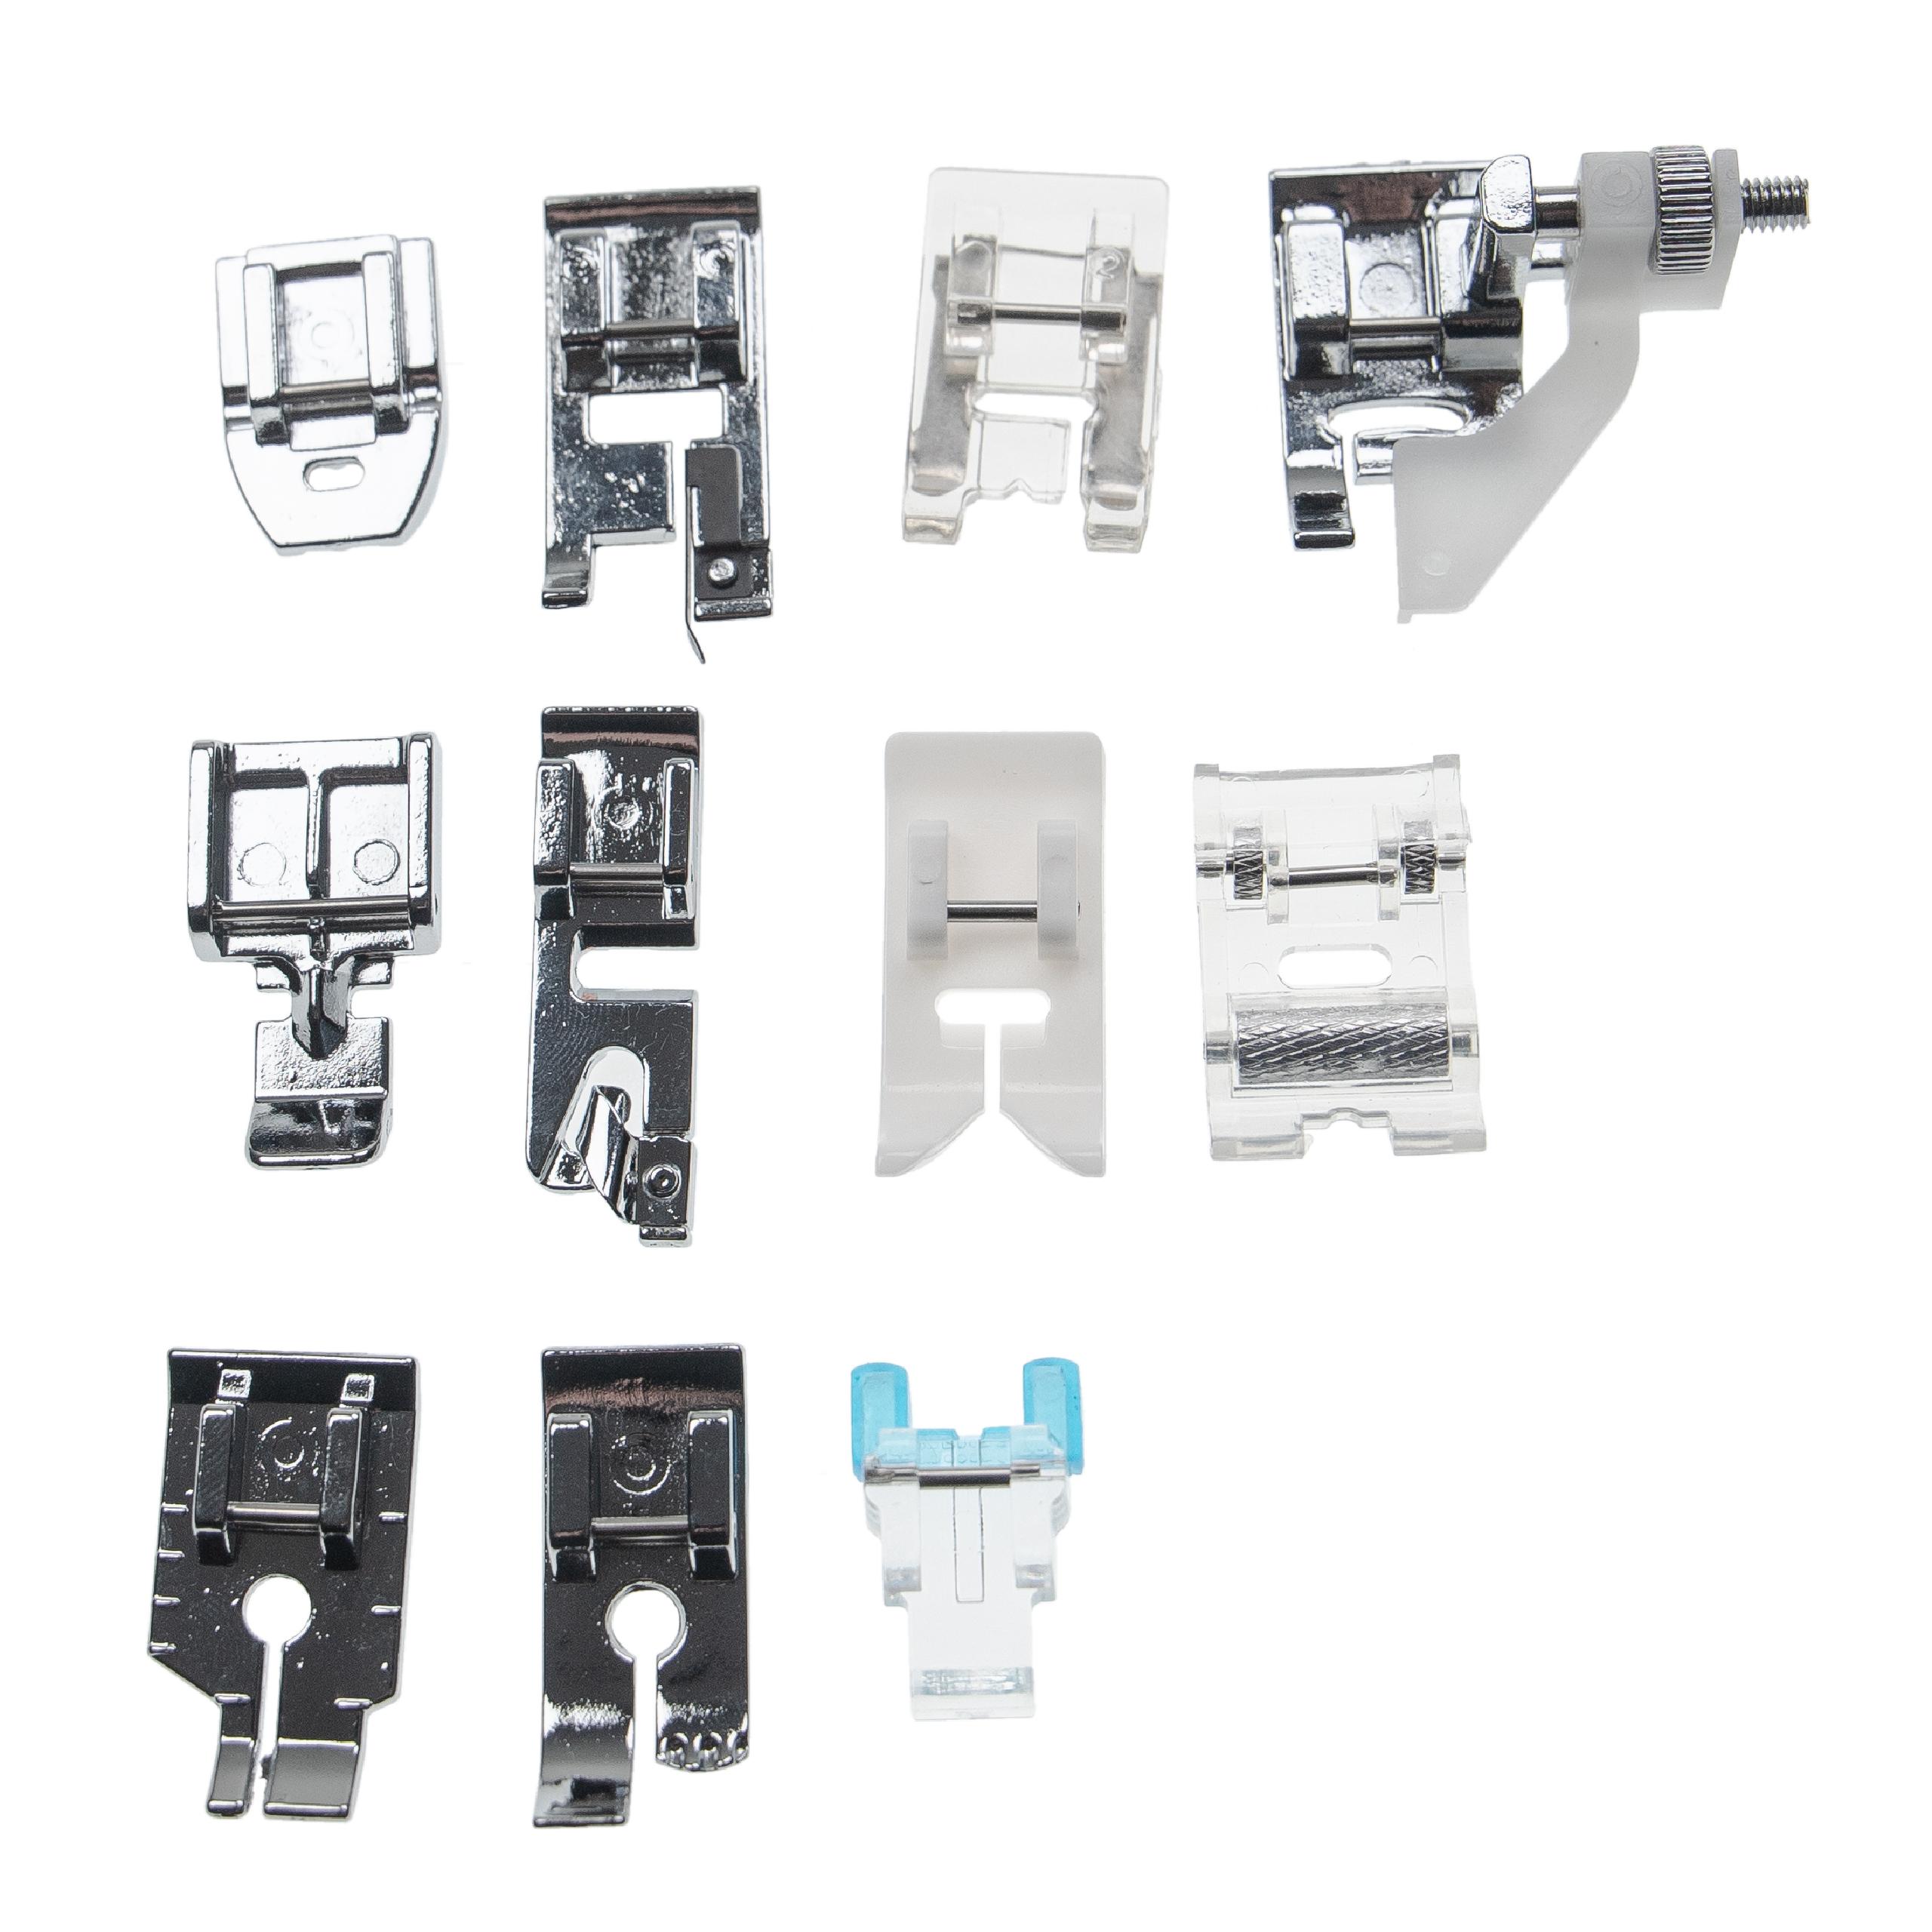 vhbw 11-Part Sewing Machine Presser Feet Set for Standard Sewing Machines with with Low Shank - Universal Sewi